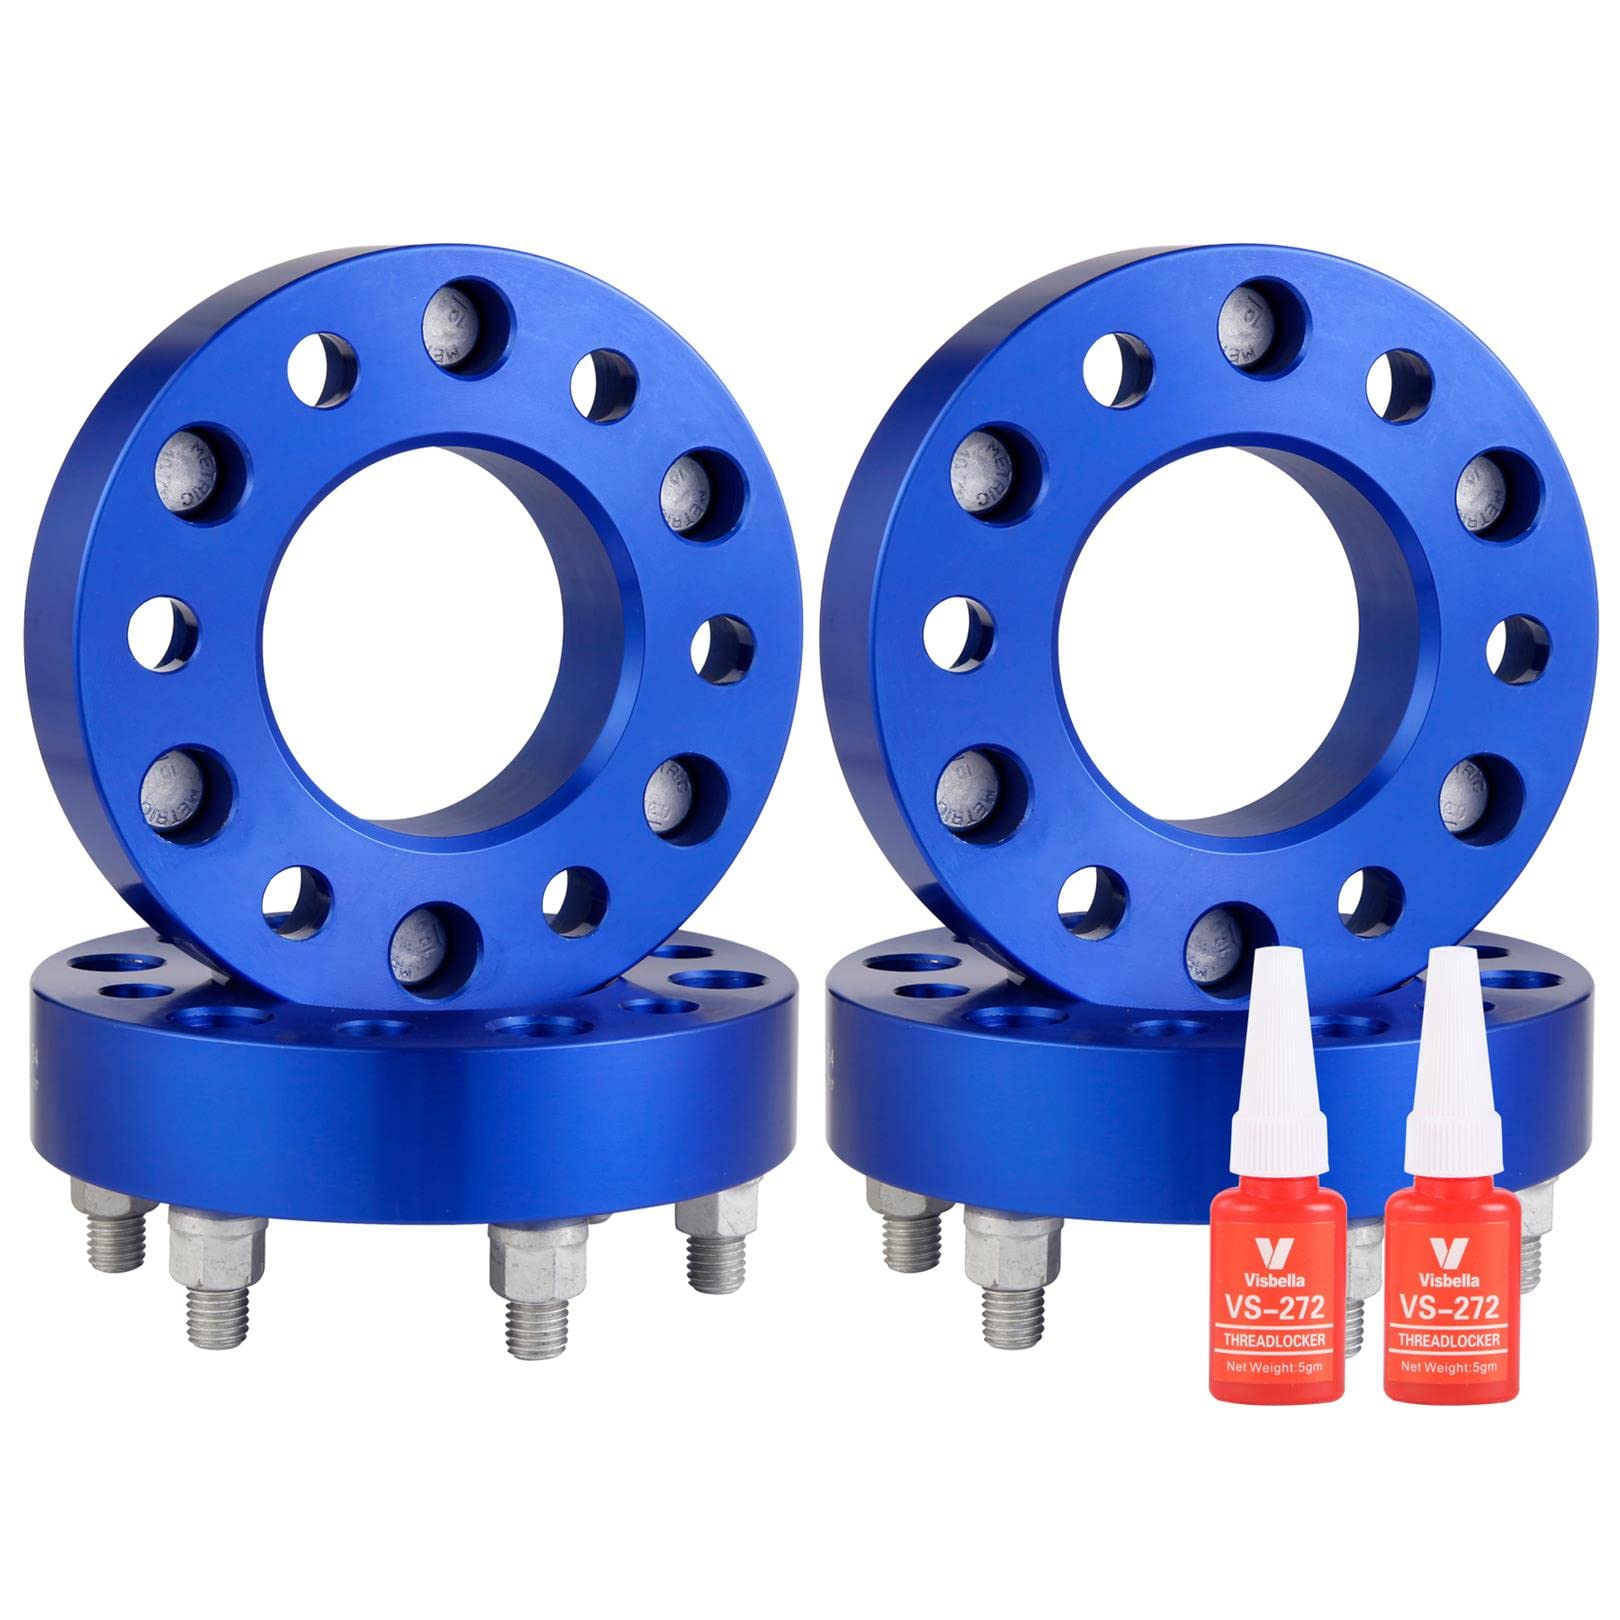 4pcs 6x135 to 6x5.5 Forged Wheel adapters 2” with M14x2 studs for Aftermarket Wheels with 6x5.5 or 6x139.7 PCD, Compatible with Ford 6 Lug 6x135 to 6x139.7 for 2004-2014 F150 | 2003-2014 Expedition